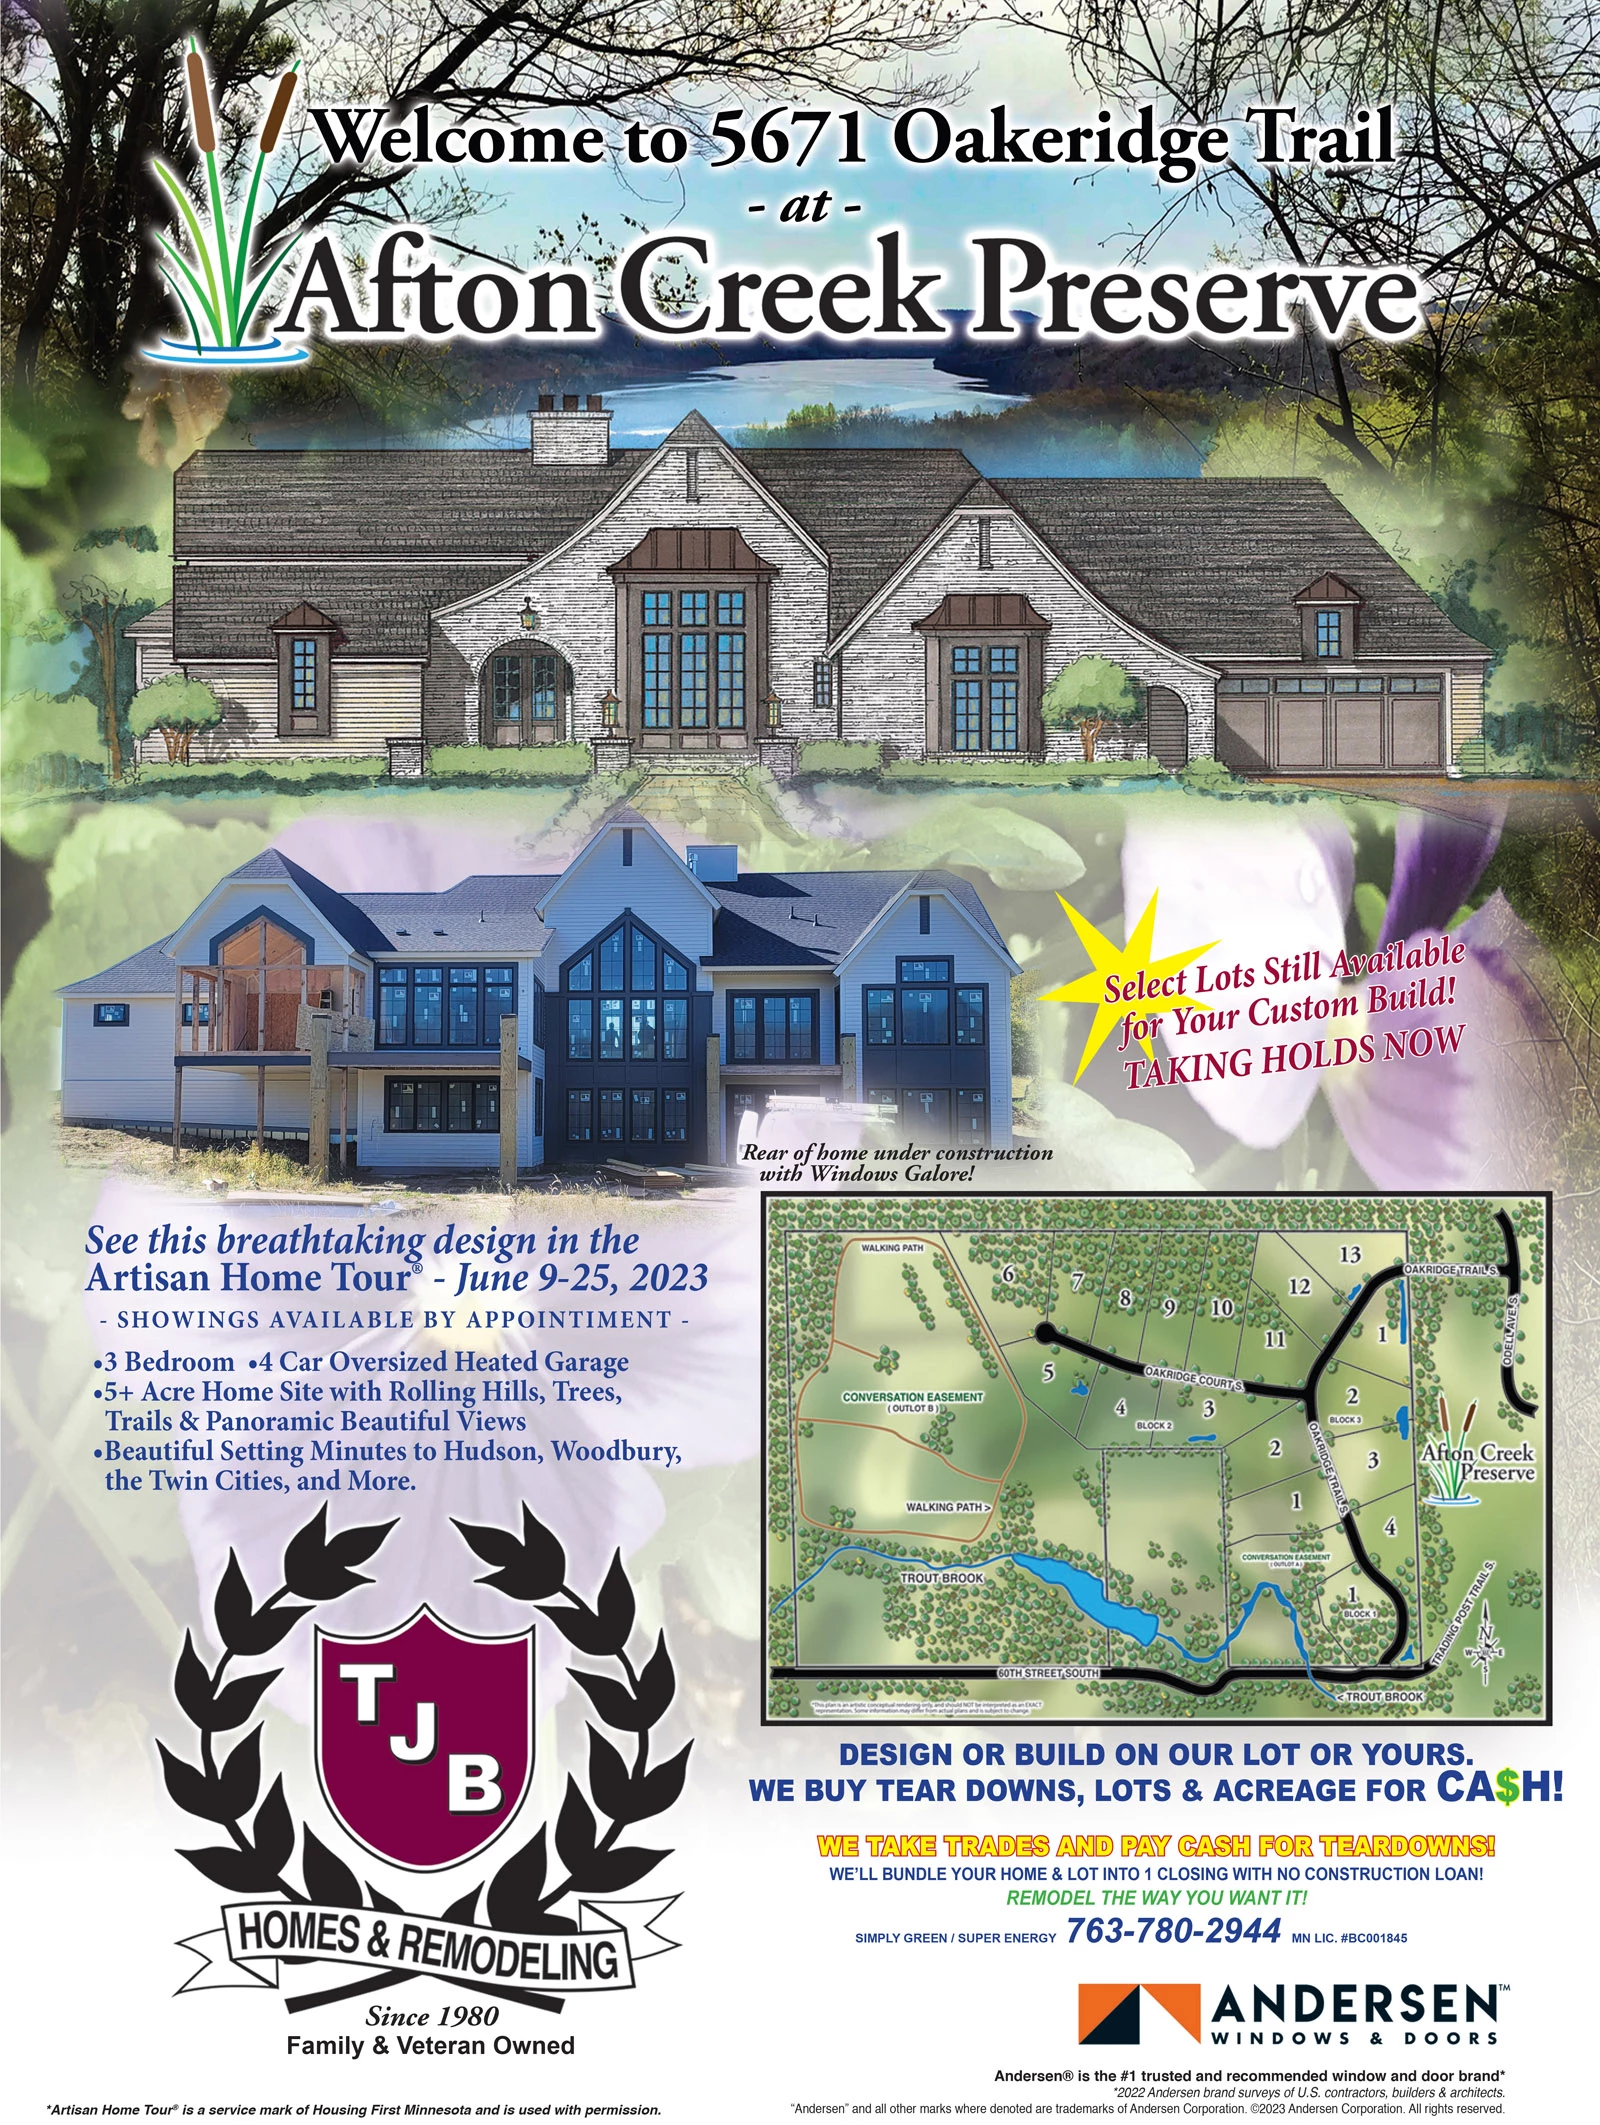 Wlecome to 5671 Oakridge Trail at Afton Creek Preserve. See this breathtaking design in the Artisan Home Tour June 9-25, 2023. Select Lots Still Available for Your Custom Build! TAKING HOLDS NOW.